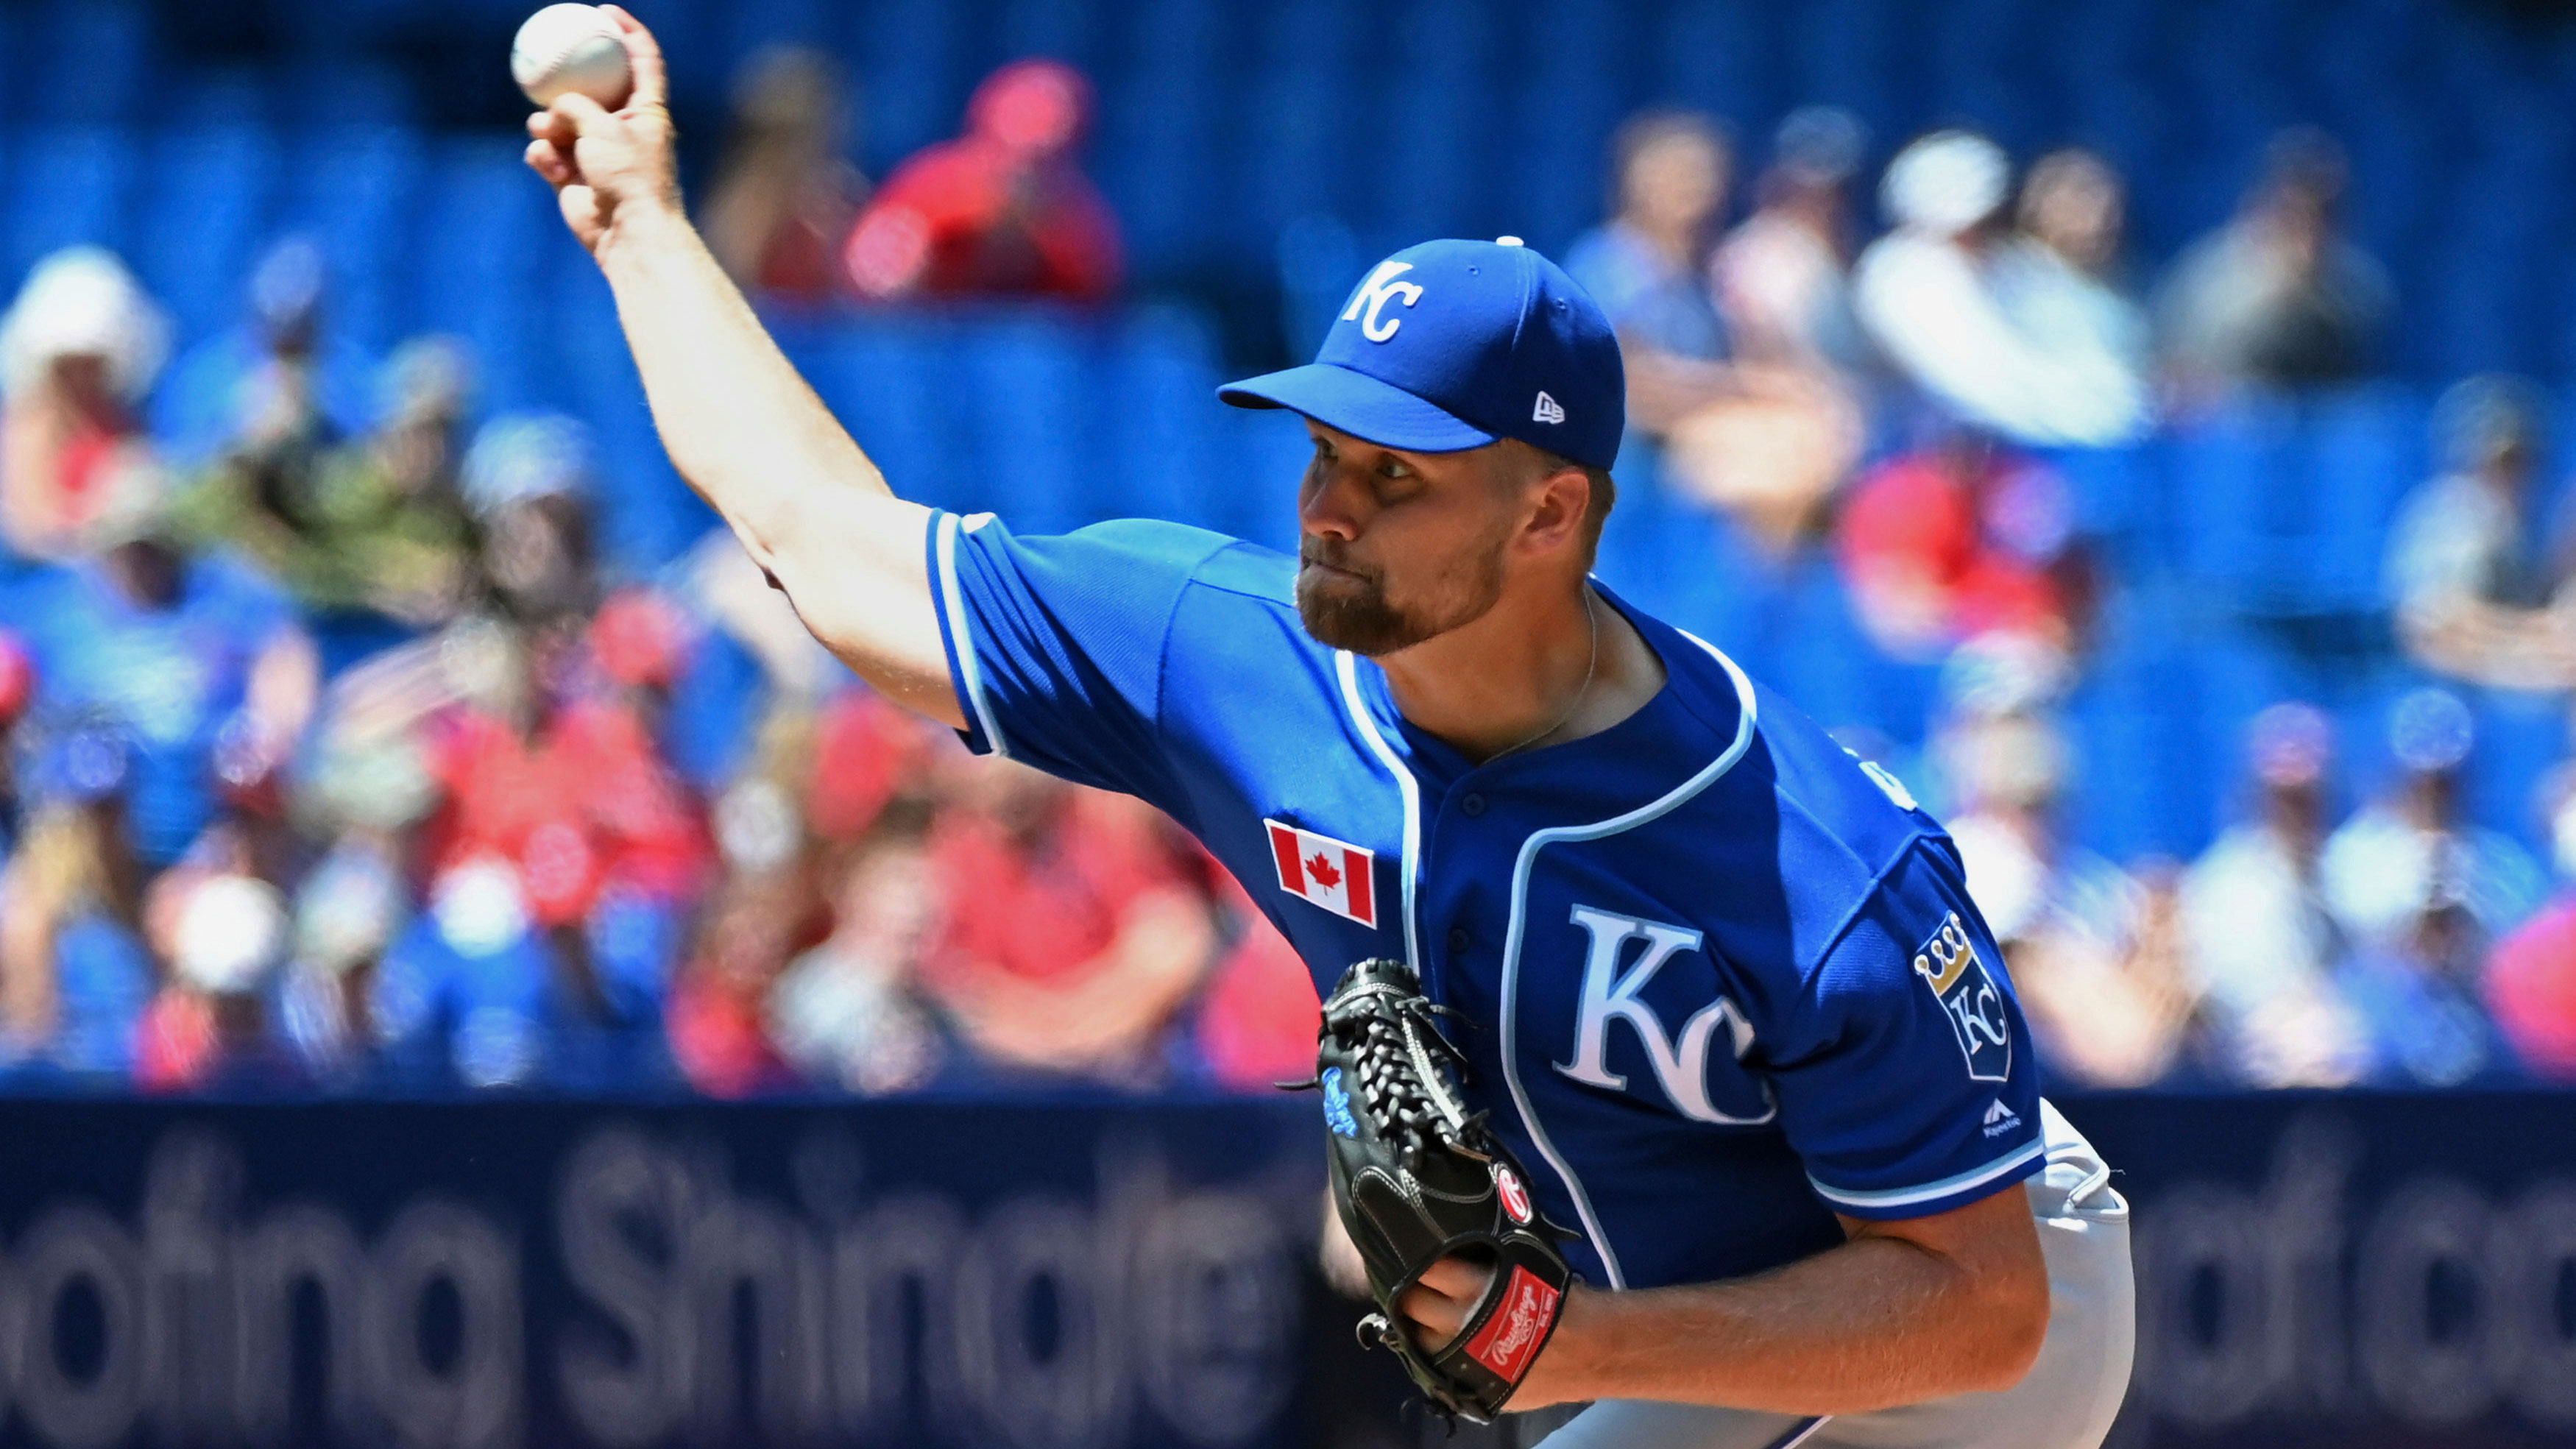 Toronto bats reign supreme on Canada Day in 11-4 Royals loss